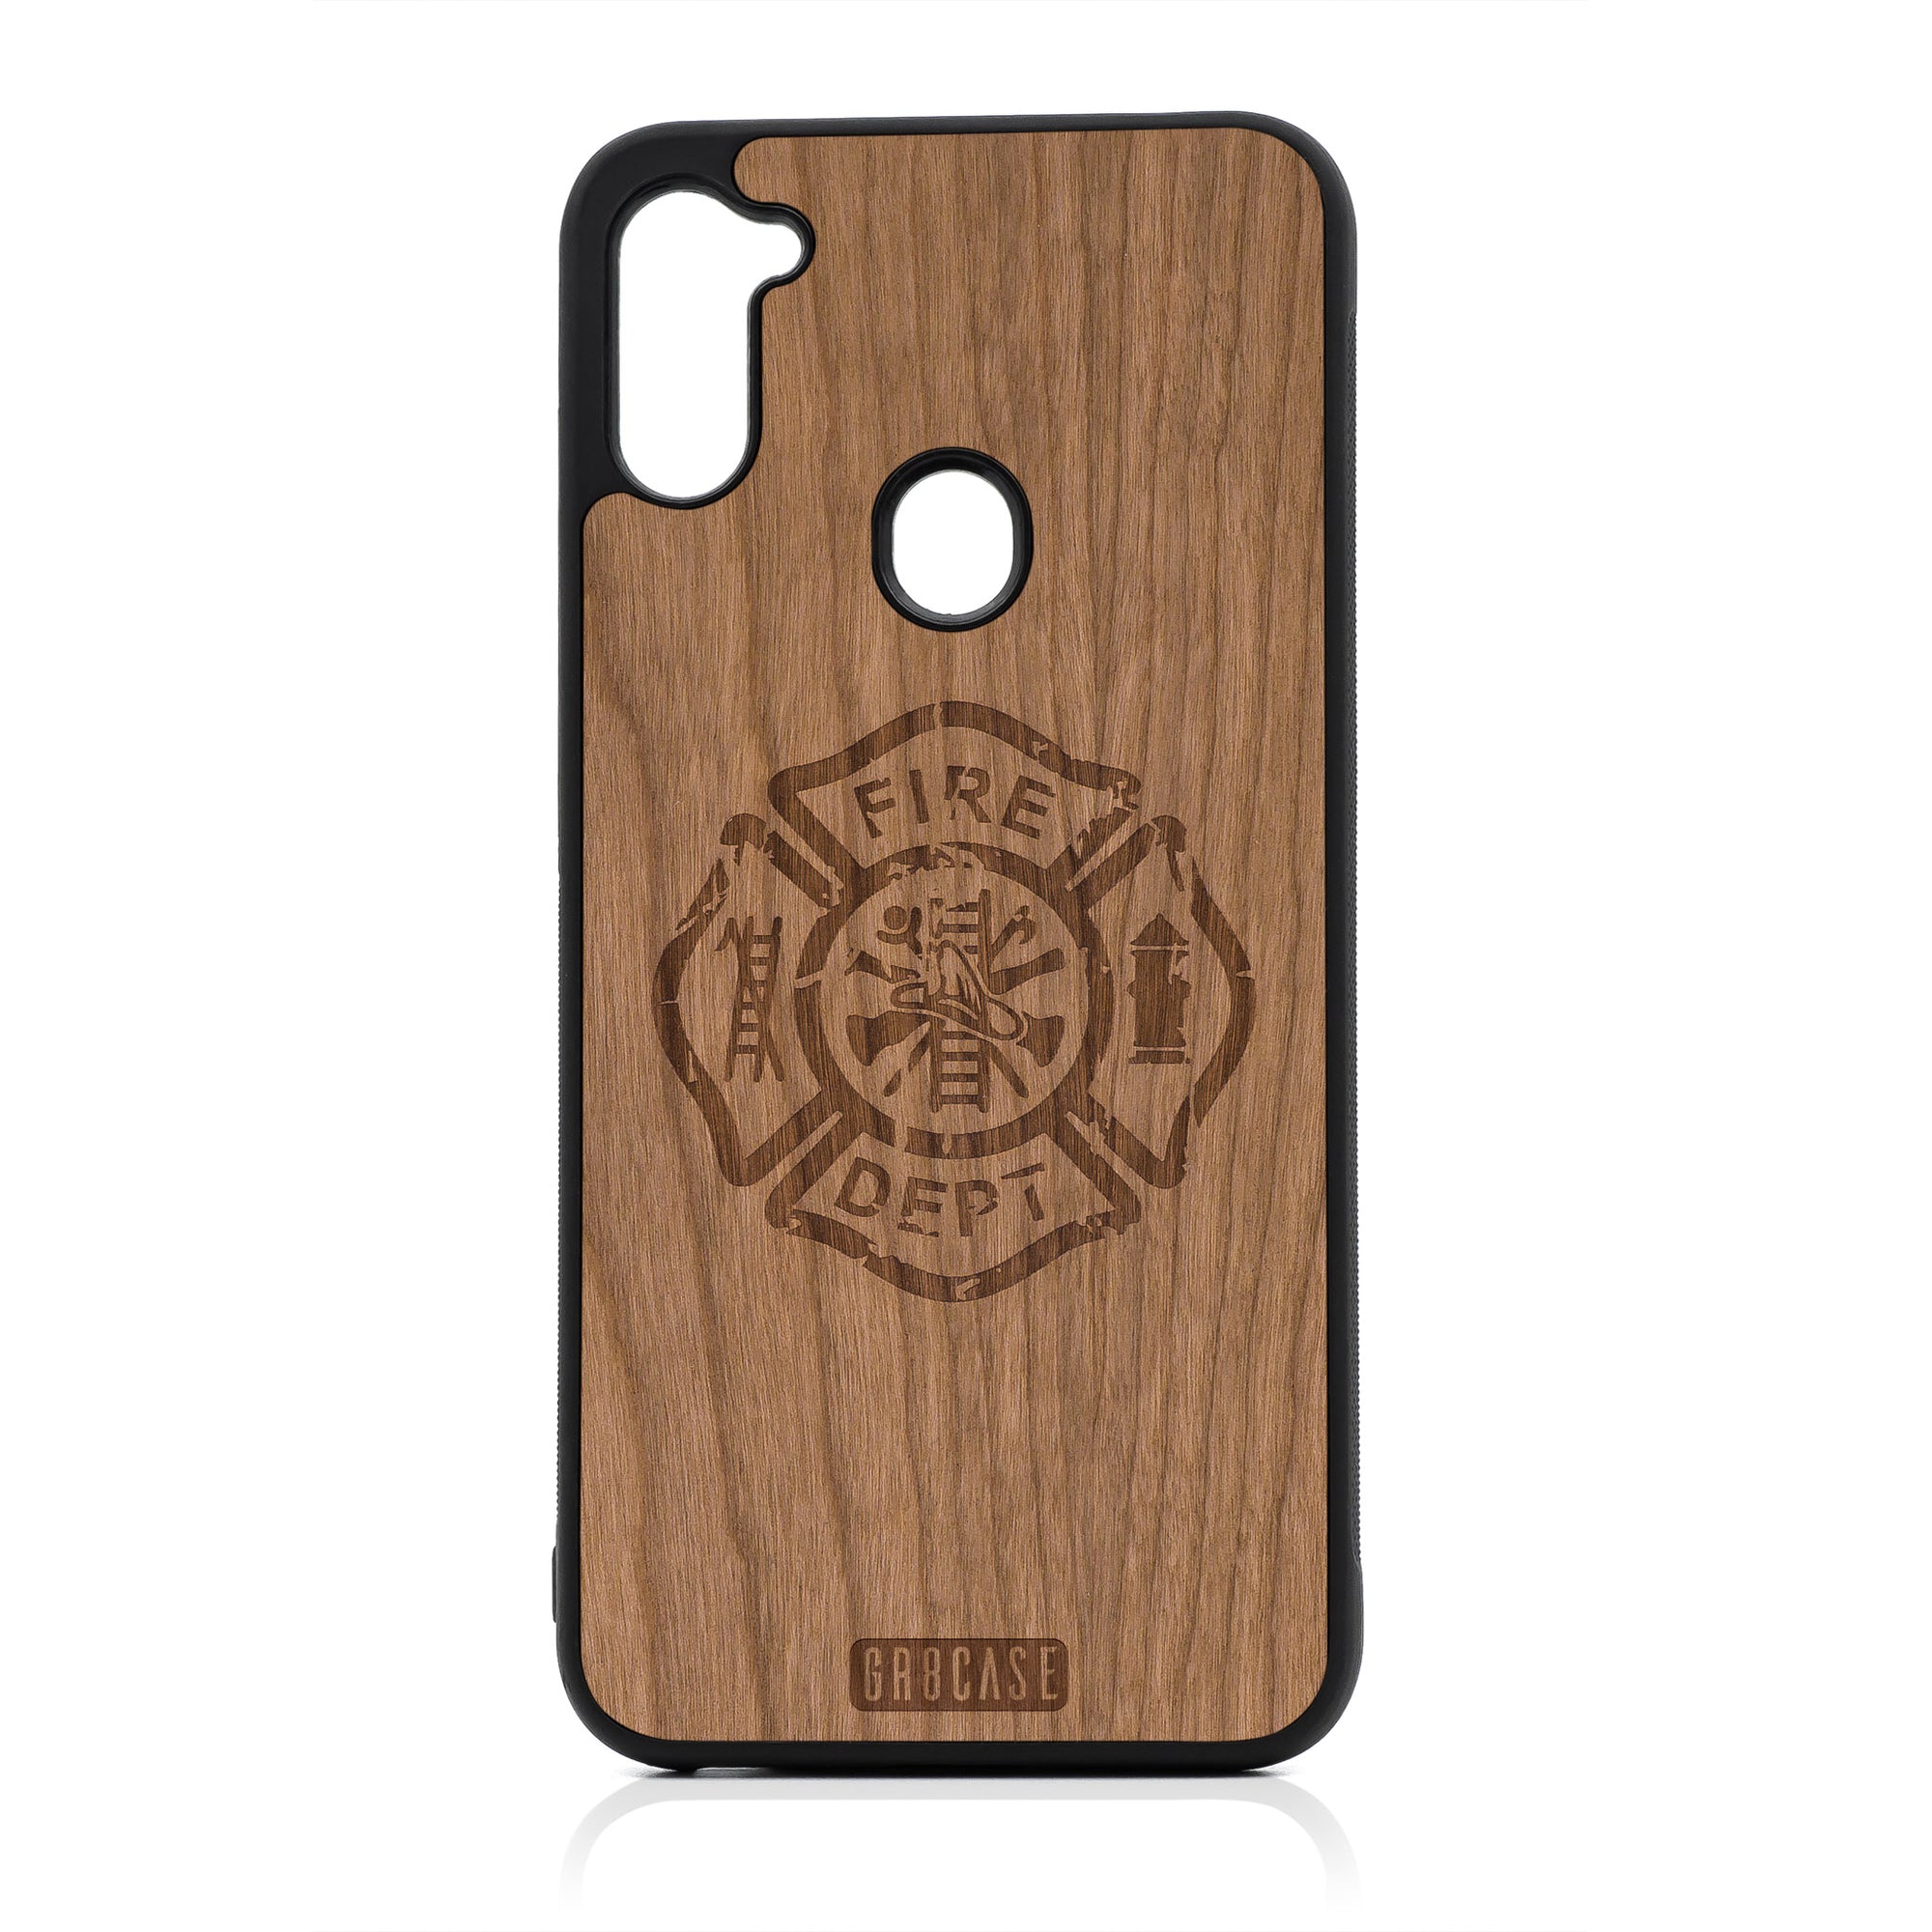 Fire Department Design Wood Case For Samsung Galaxy A11